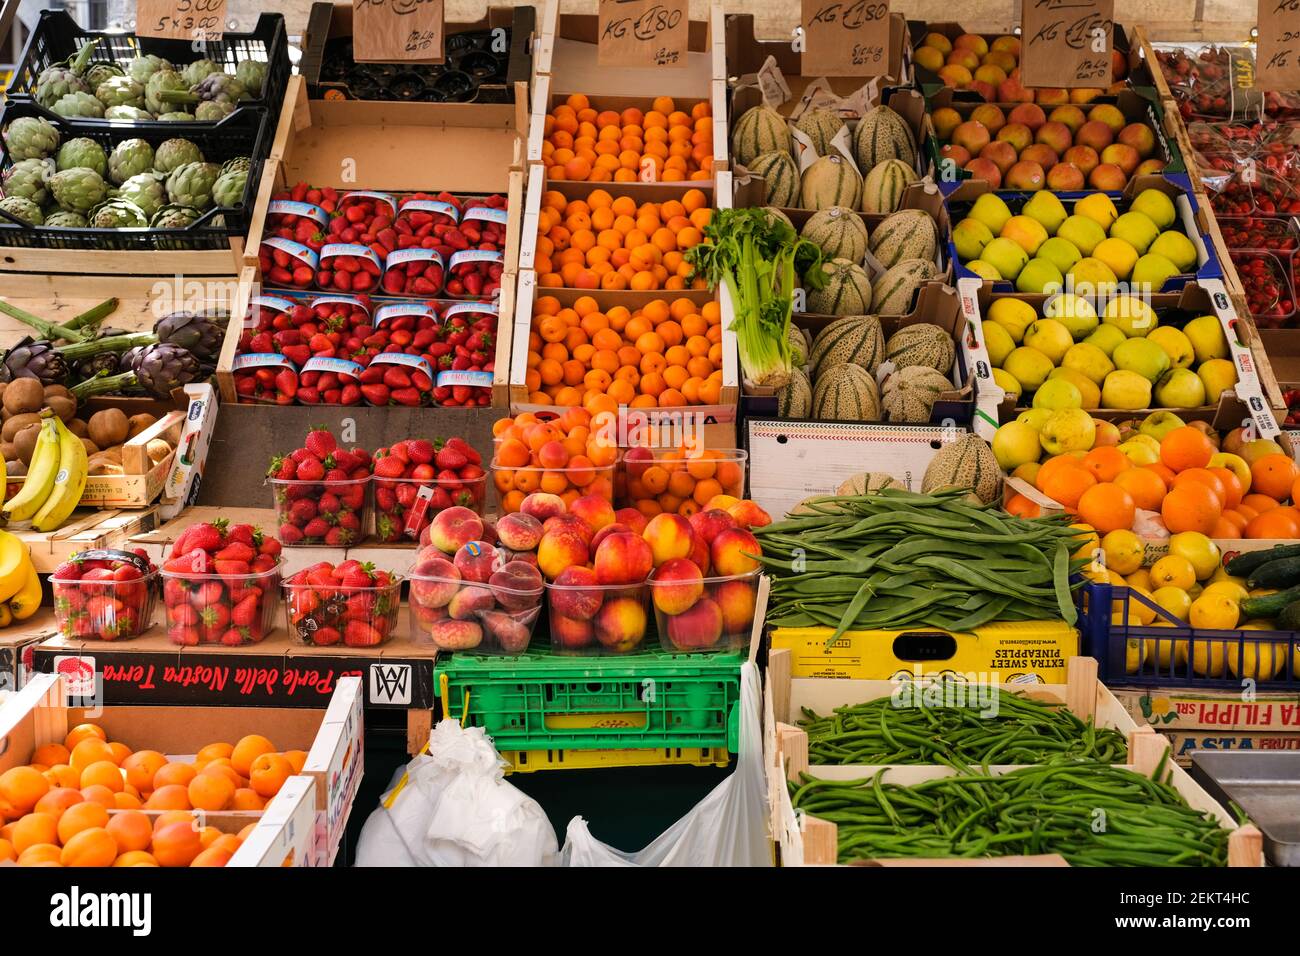 Fruit and vegetables on display at the market in Piazza della Frutta in Padua Italy Stock Photo